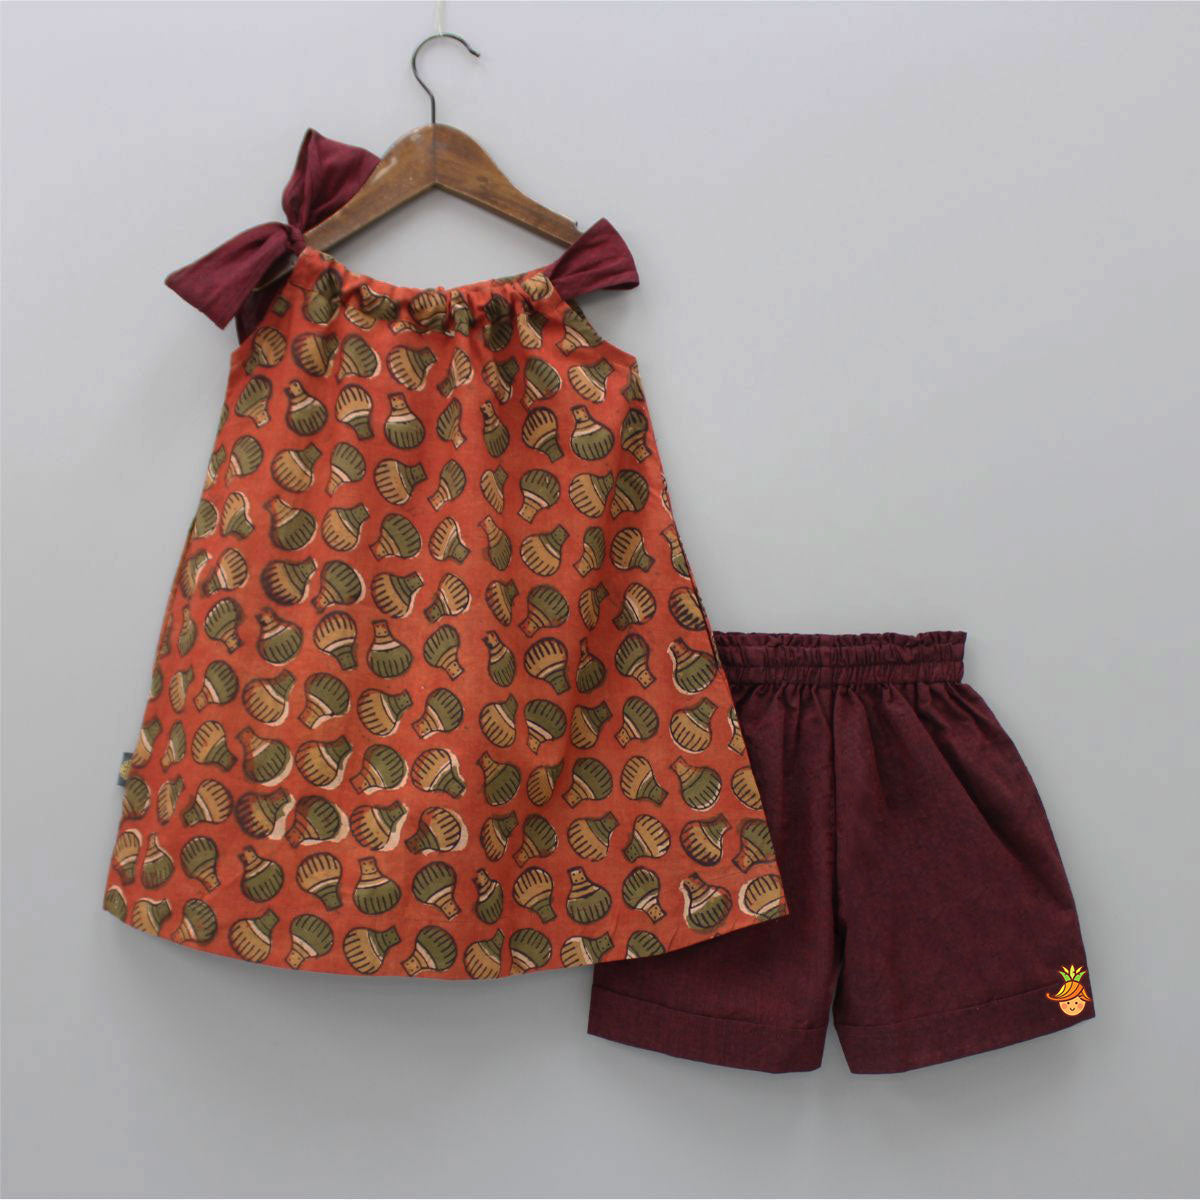 Hand Block Printed Tie Up Top And Burgundy Shorts